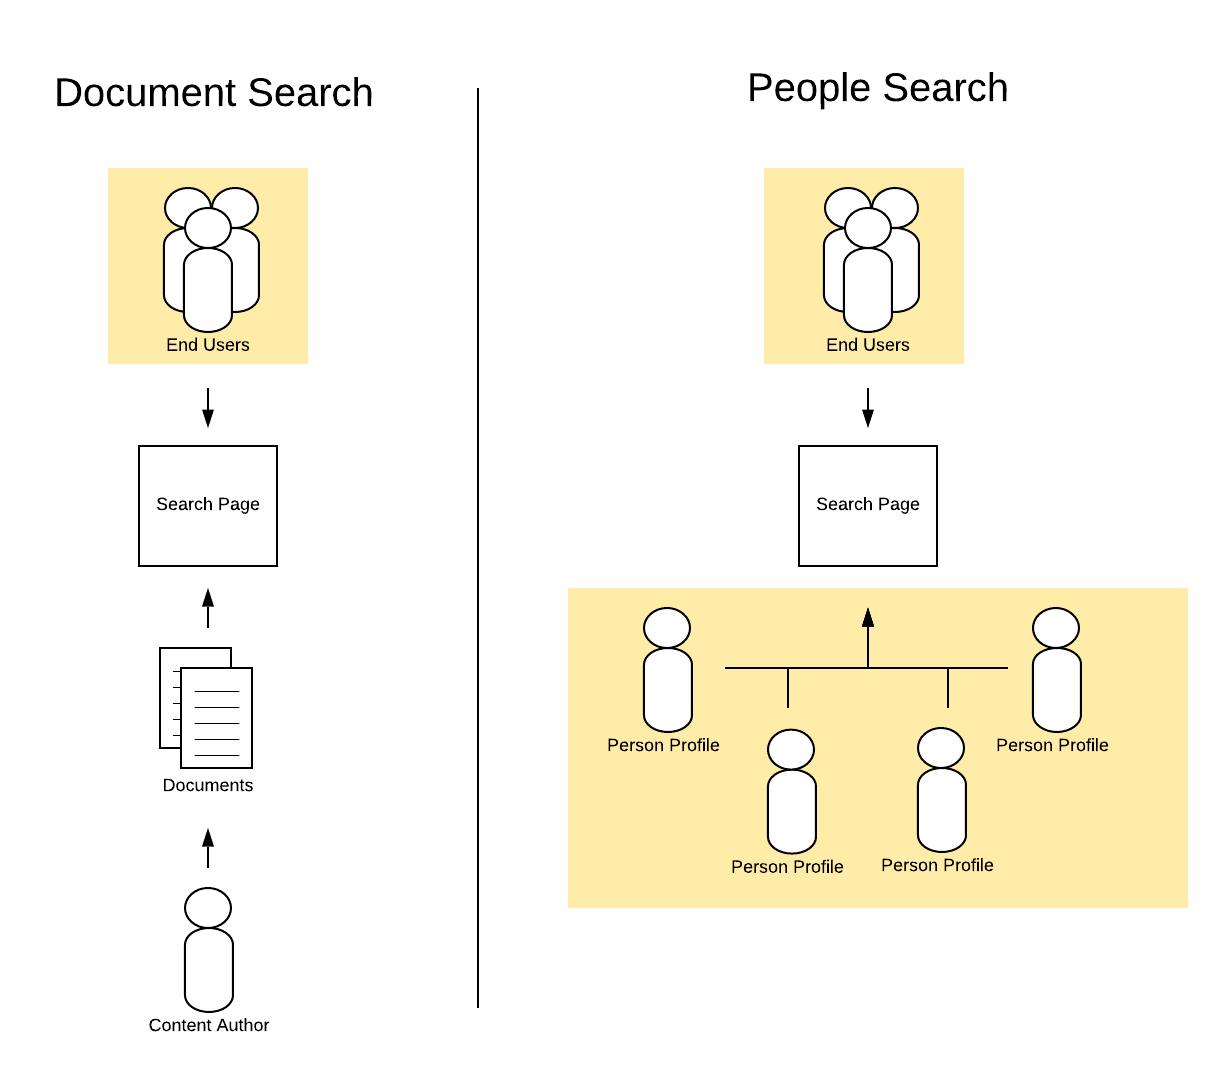 Document Search versus People Search